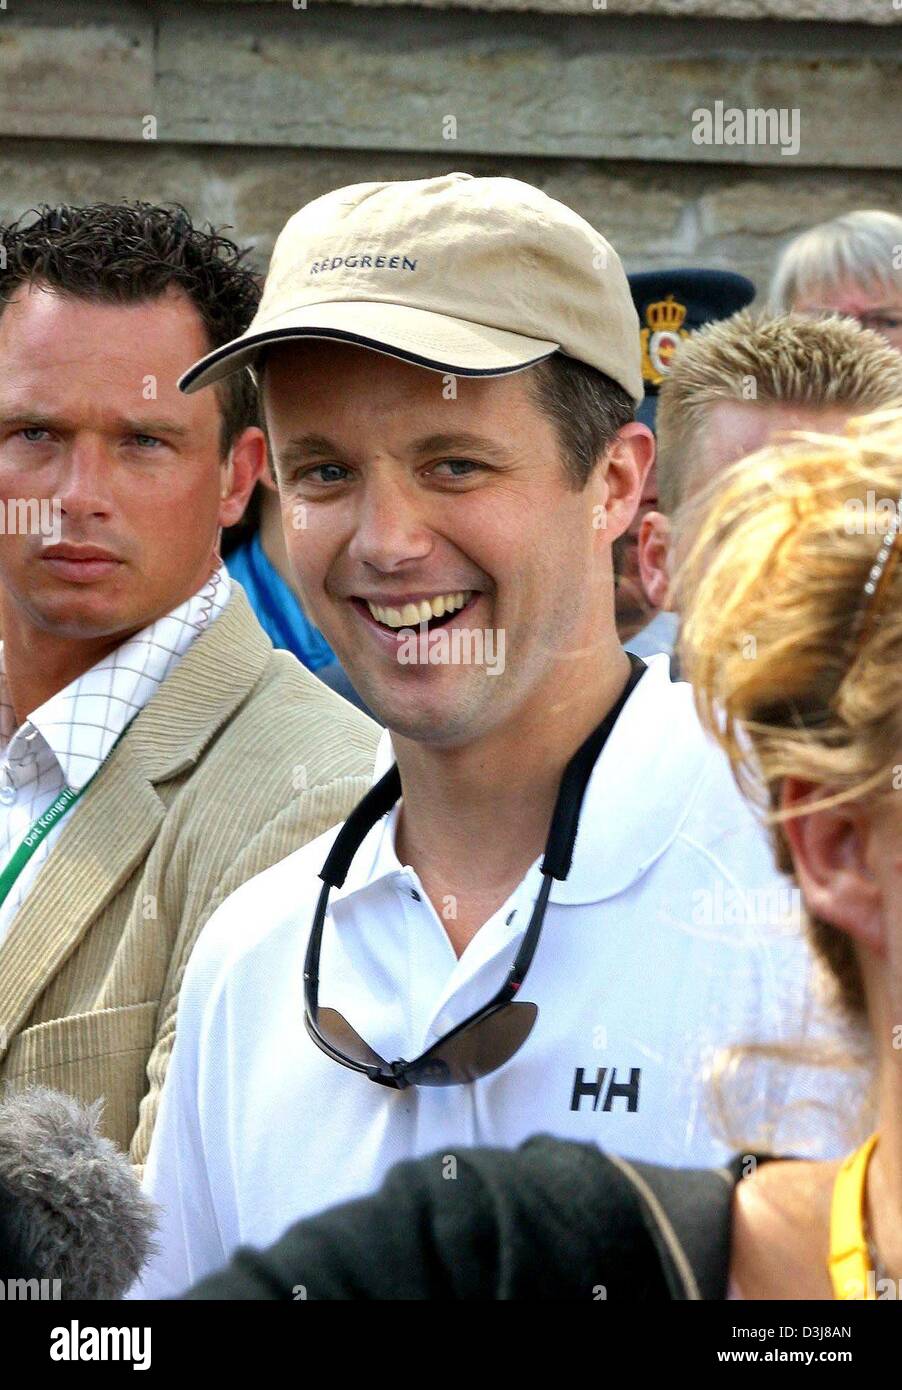 (dpa) - Crown prince Frederik of Denmark smiles after competing in a sailing regatta with his fiancee Mary Donaldson in the harbour of Copenhagen, Denmark, 9 May 2004. The sailing regatta which was eventually won by Mary. Stock Photo